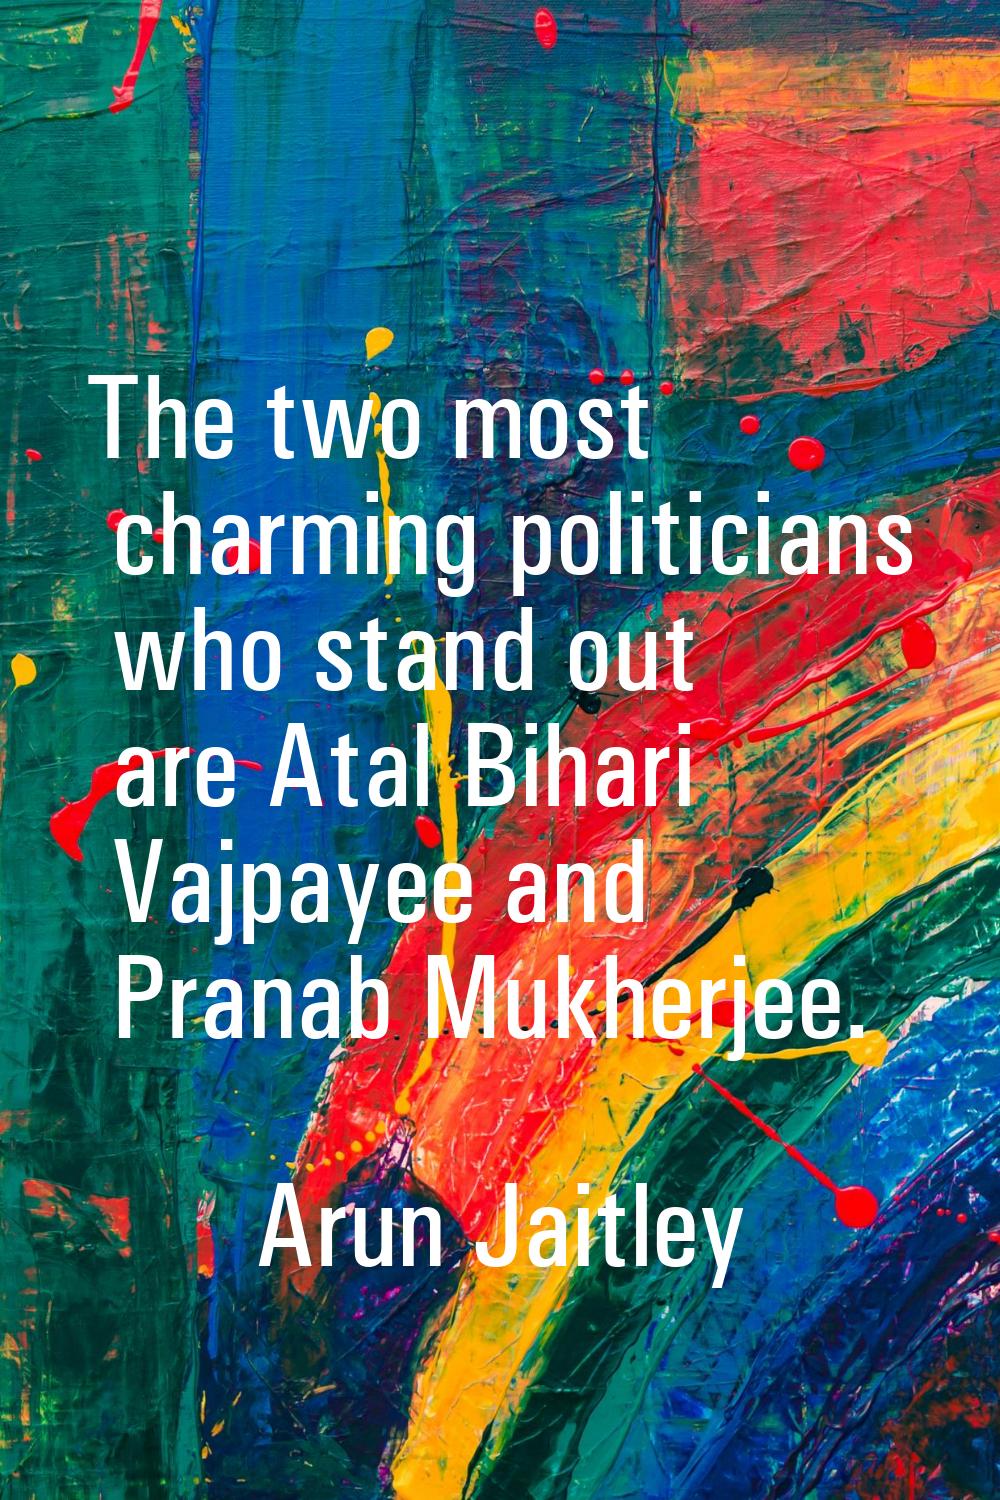 The two most charming politicians who stand out are Atal Bihari Vajpayee and Pranab Mukherjee.